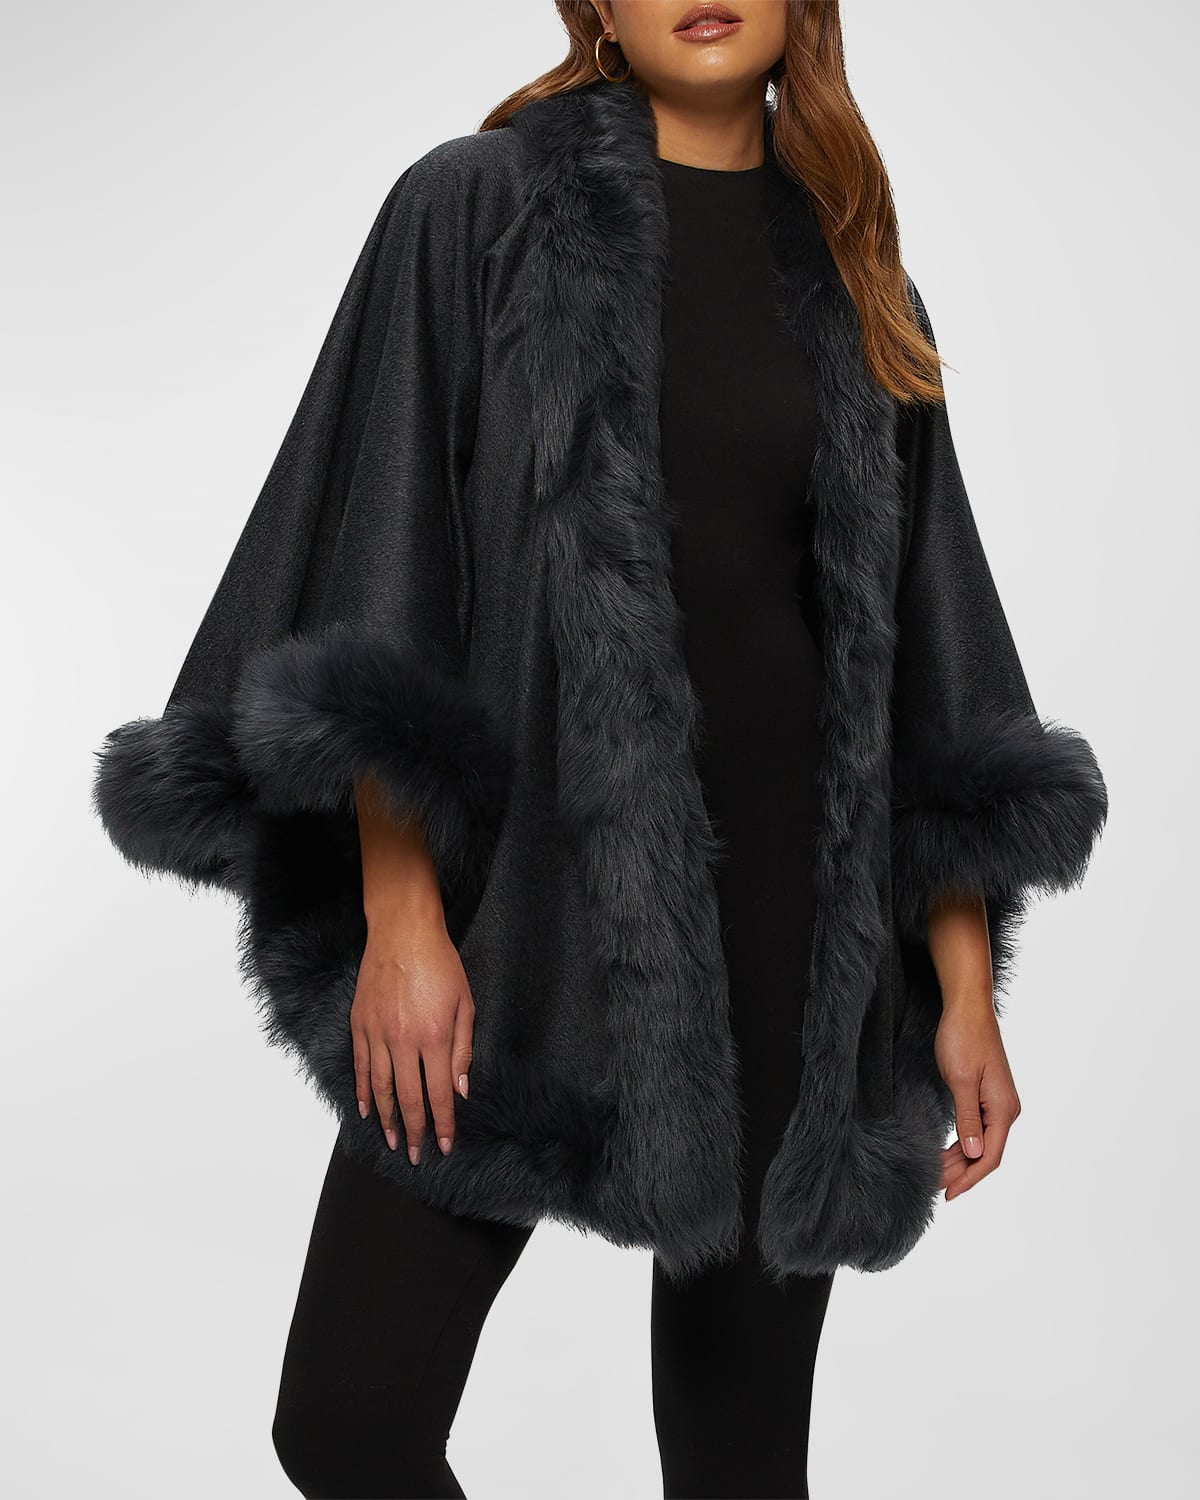 Cashmere Capelet with Lamb Shearling Trim